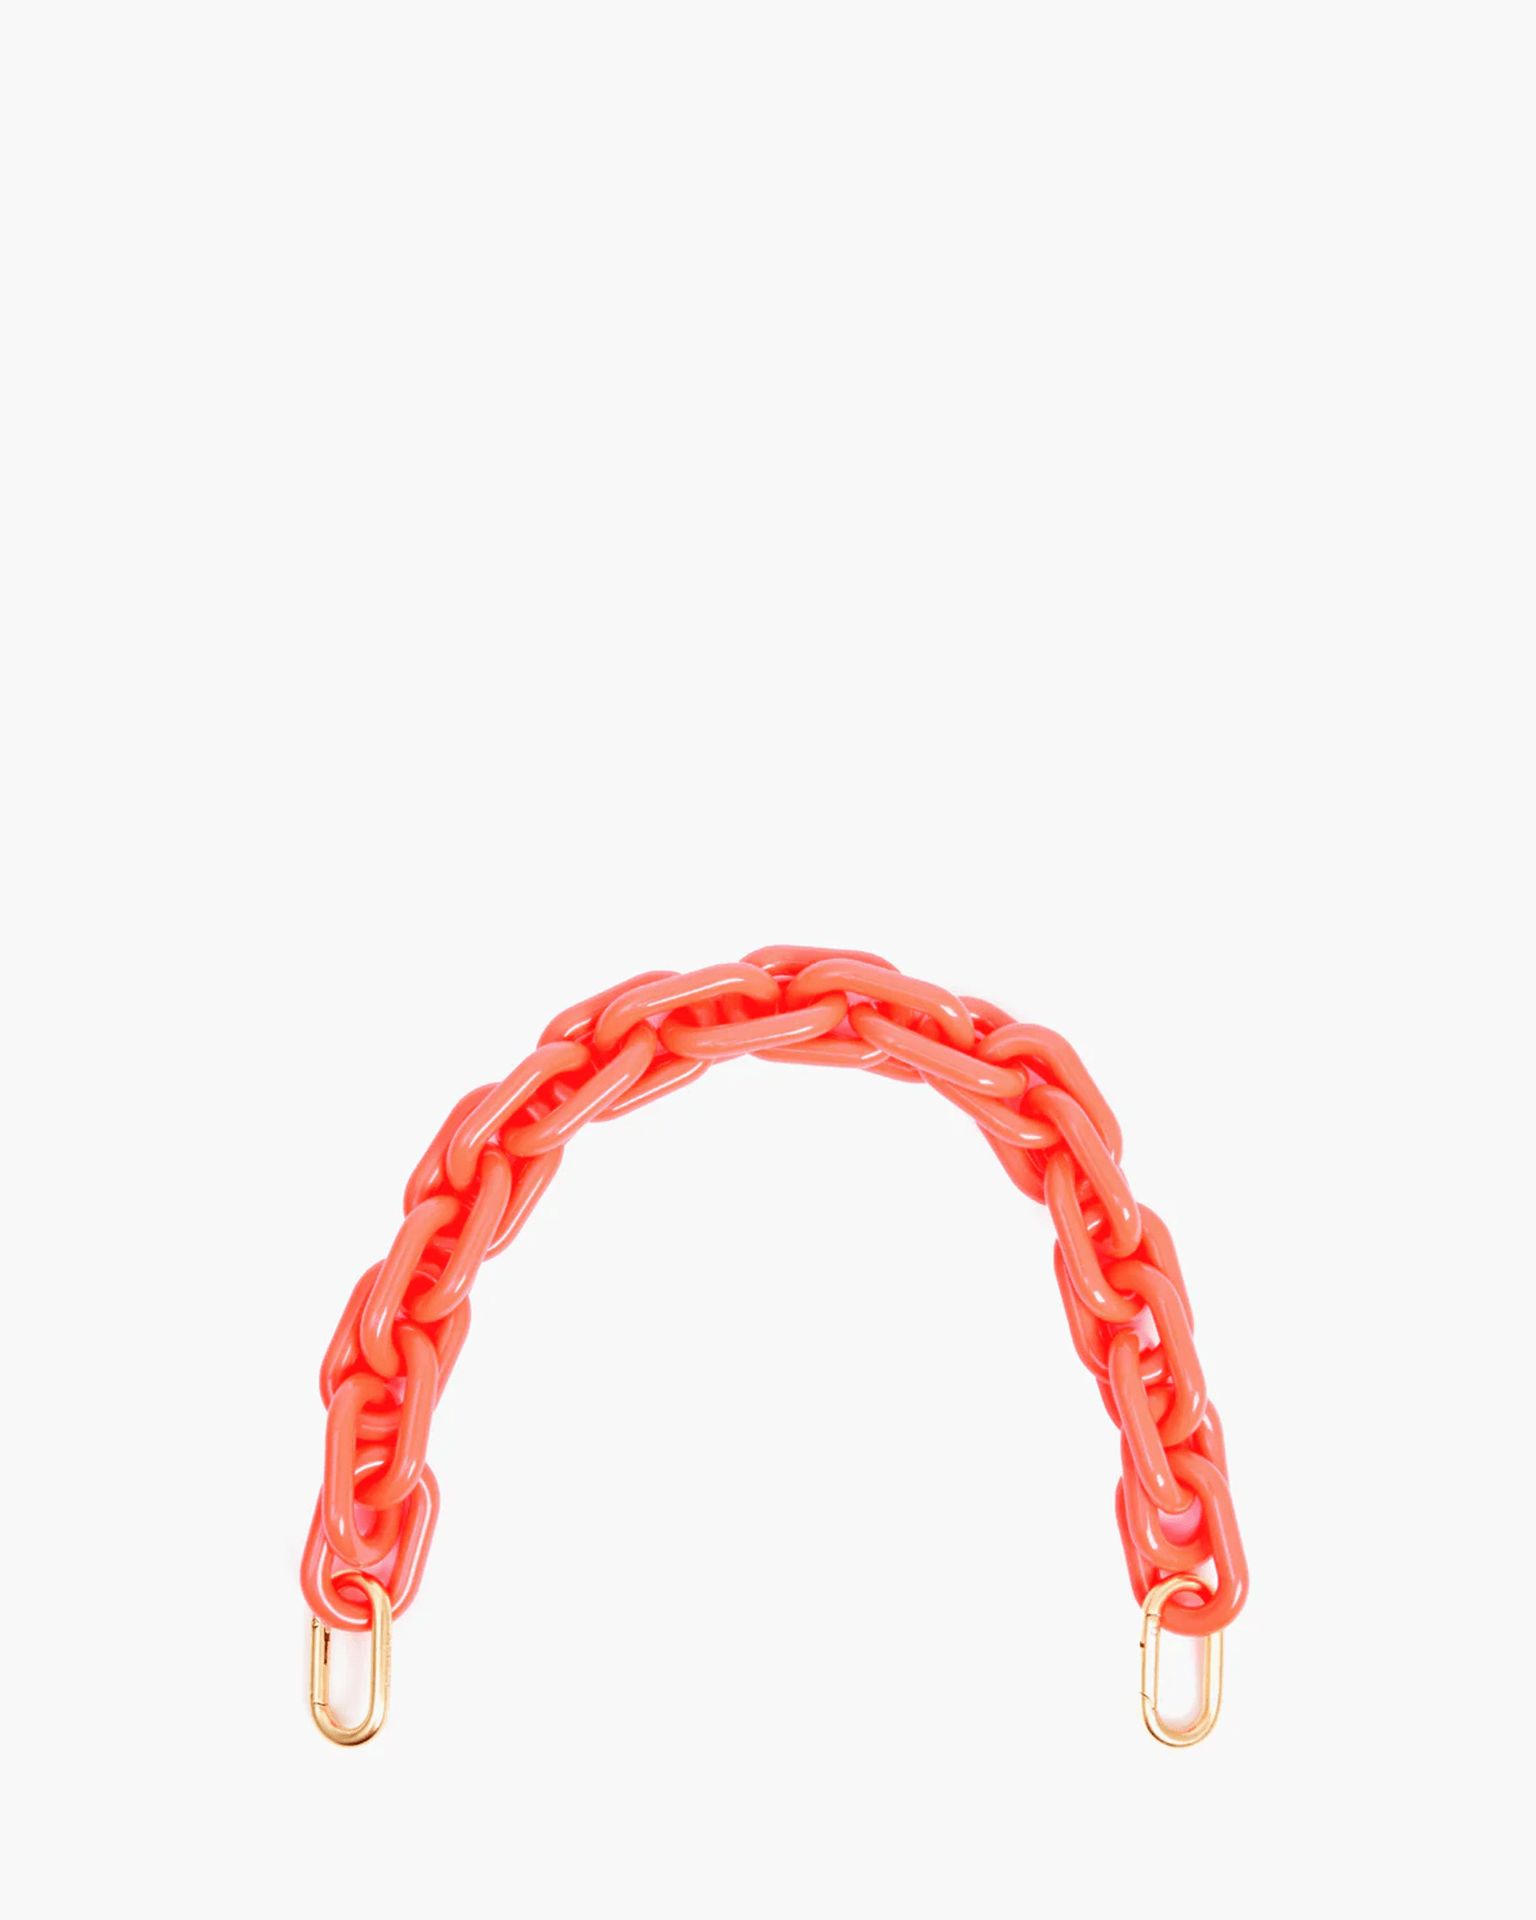 Shortie Strap in Bright Coral Resin